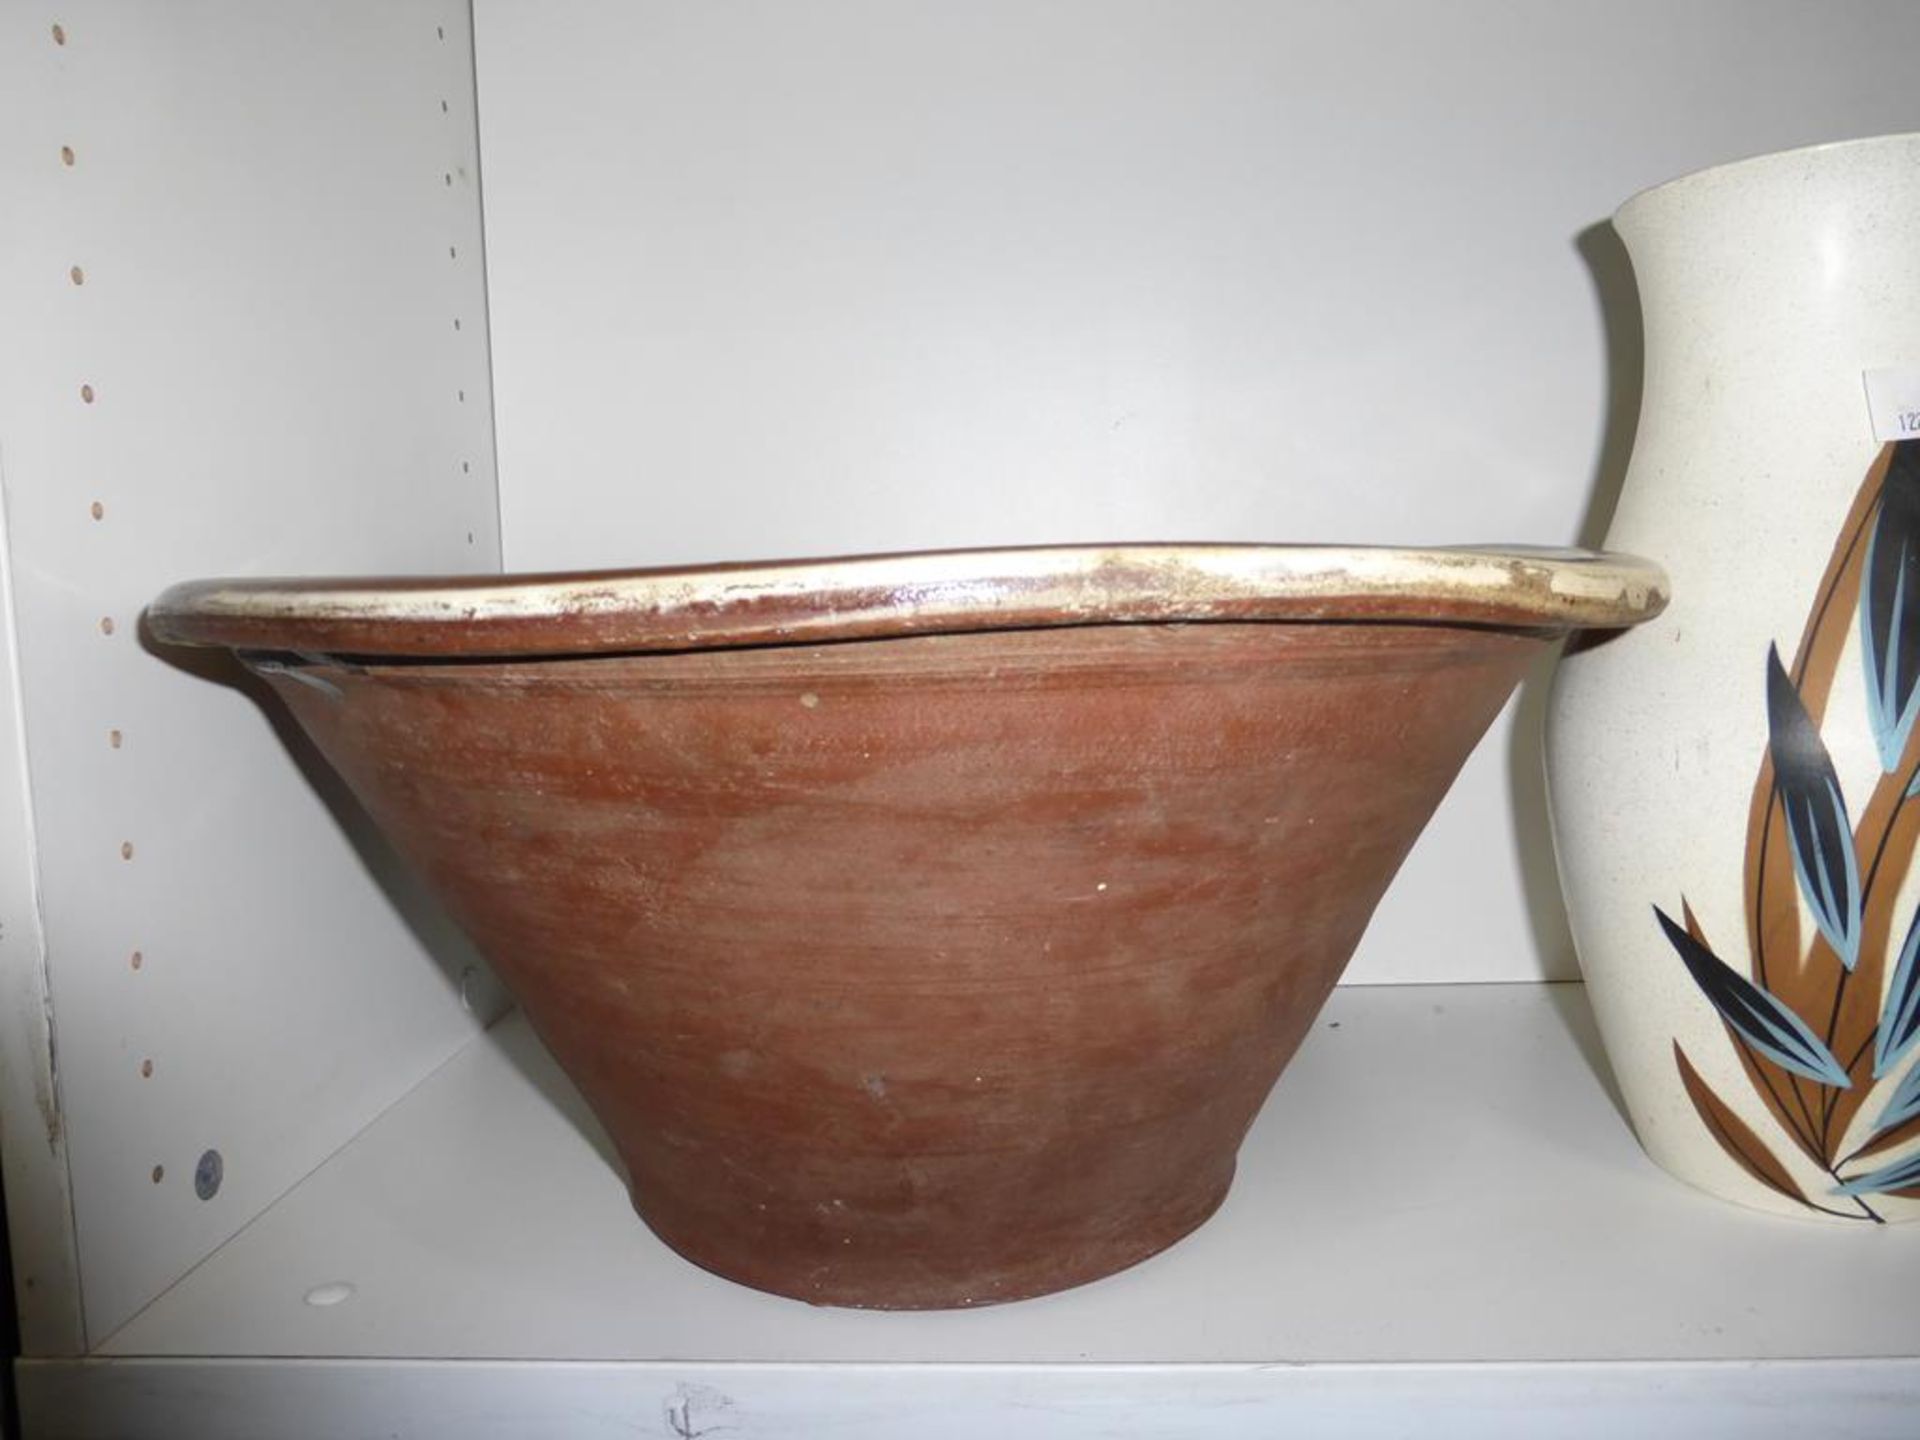 Two Pottery Bowls, One larger than the other, and a Pottery Vase. (Est £20 - £40) - Image 2 of 4